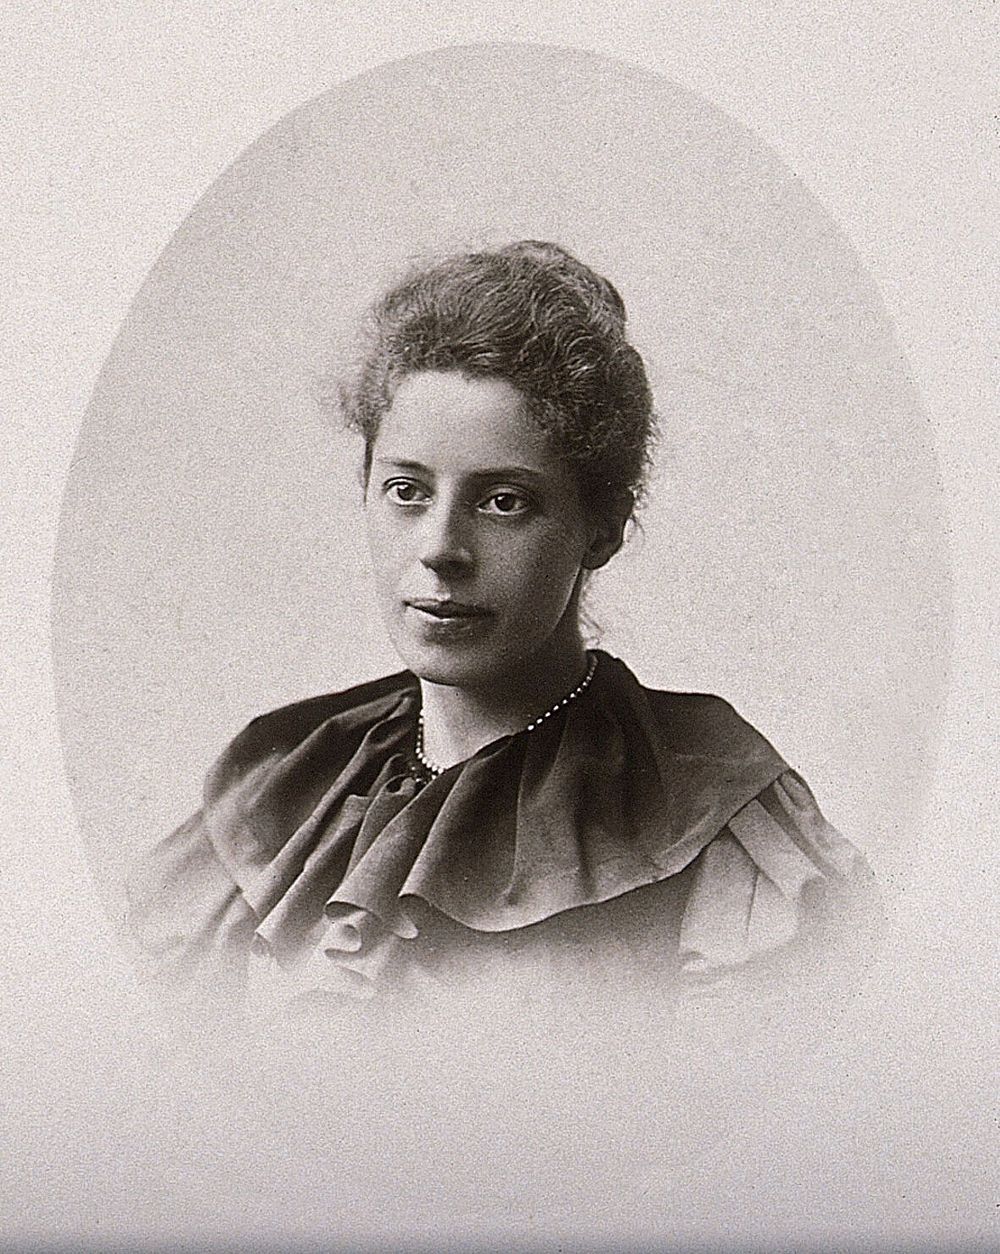 Mrs. Isaac Roberts, née Dorothea Klumpke, Doctor ès Sciences from the University of Paris, first woman awarded a doctorate…